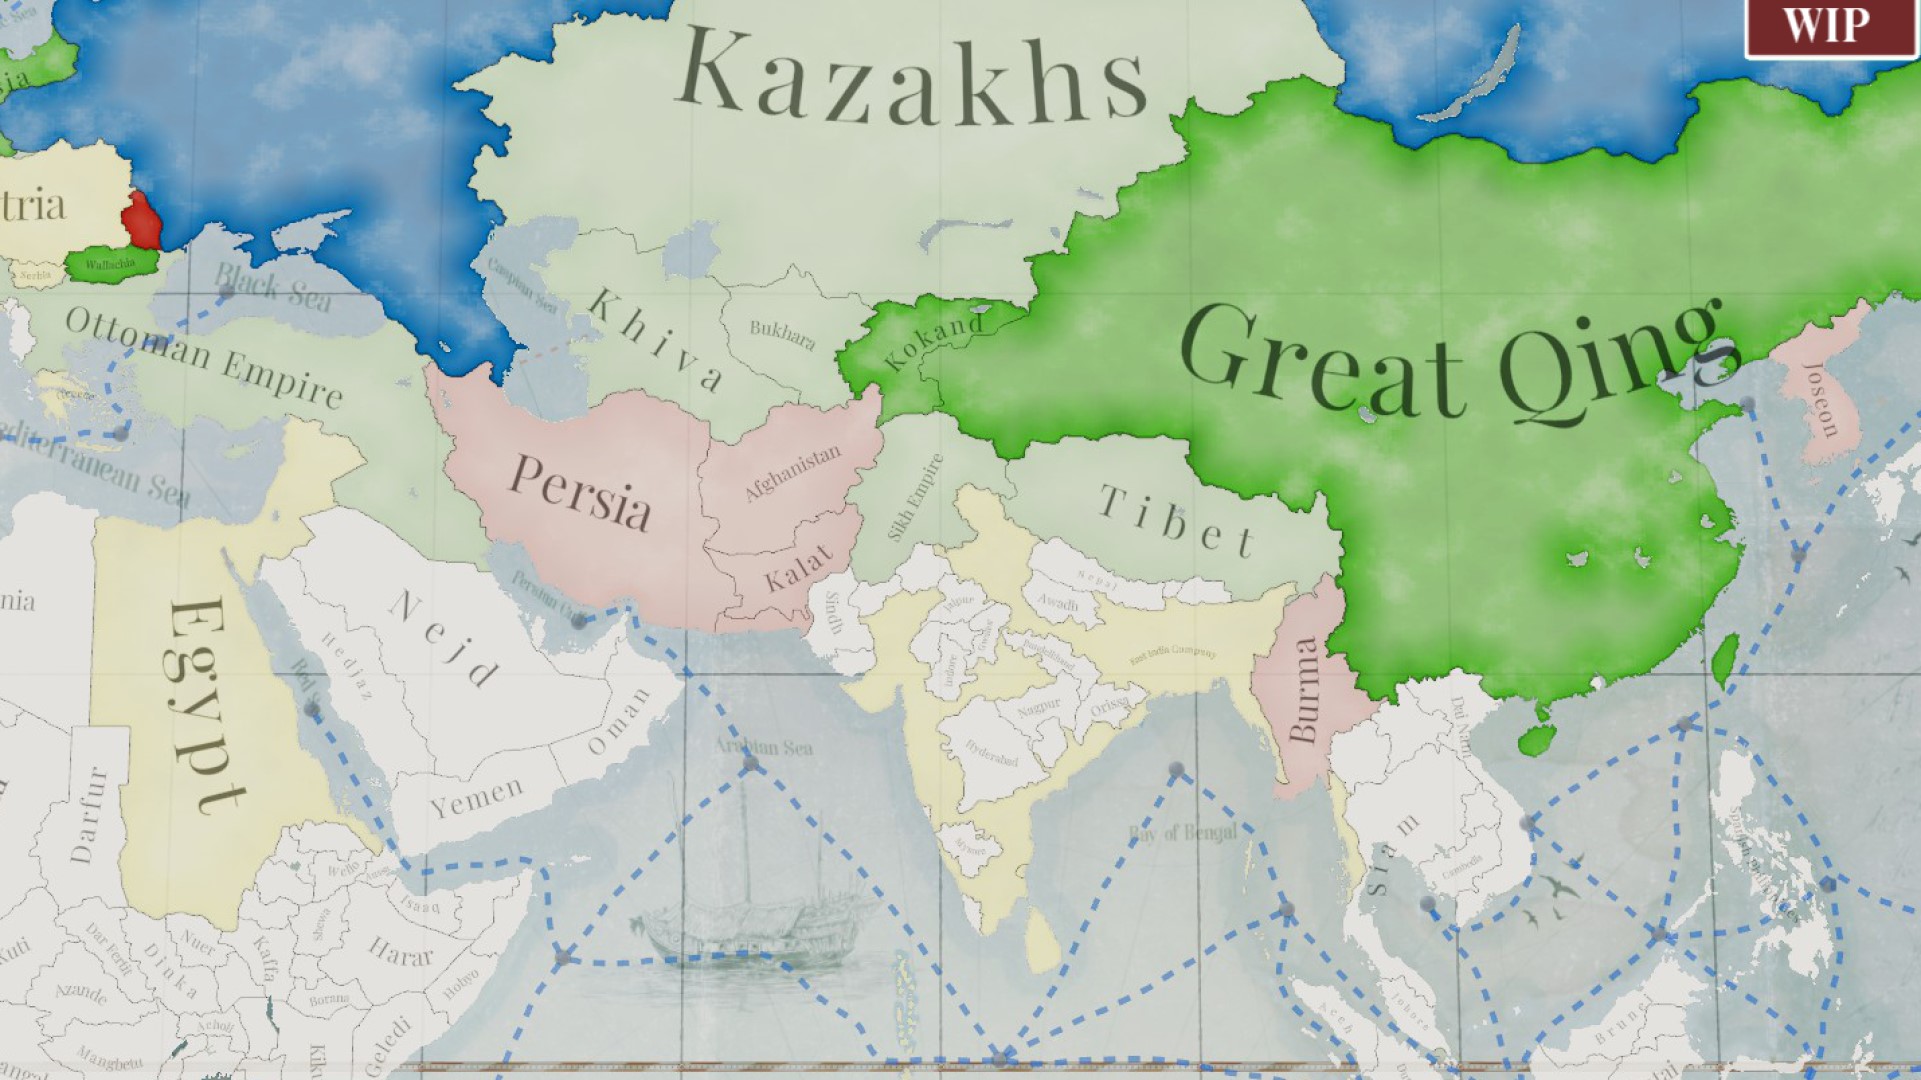 Victoria 3 will use Crusader Kings 3's tooltip system so you don't need an econ degree